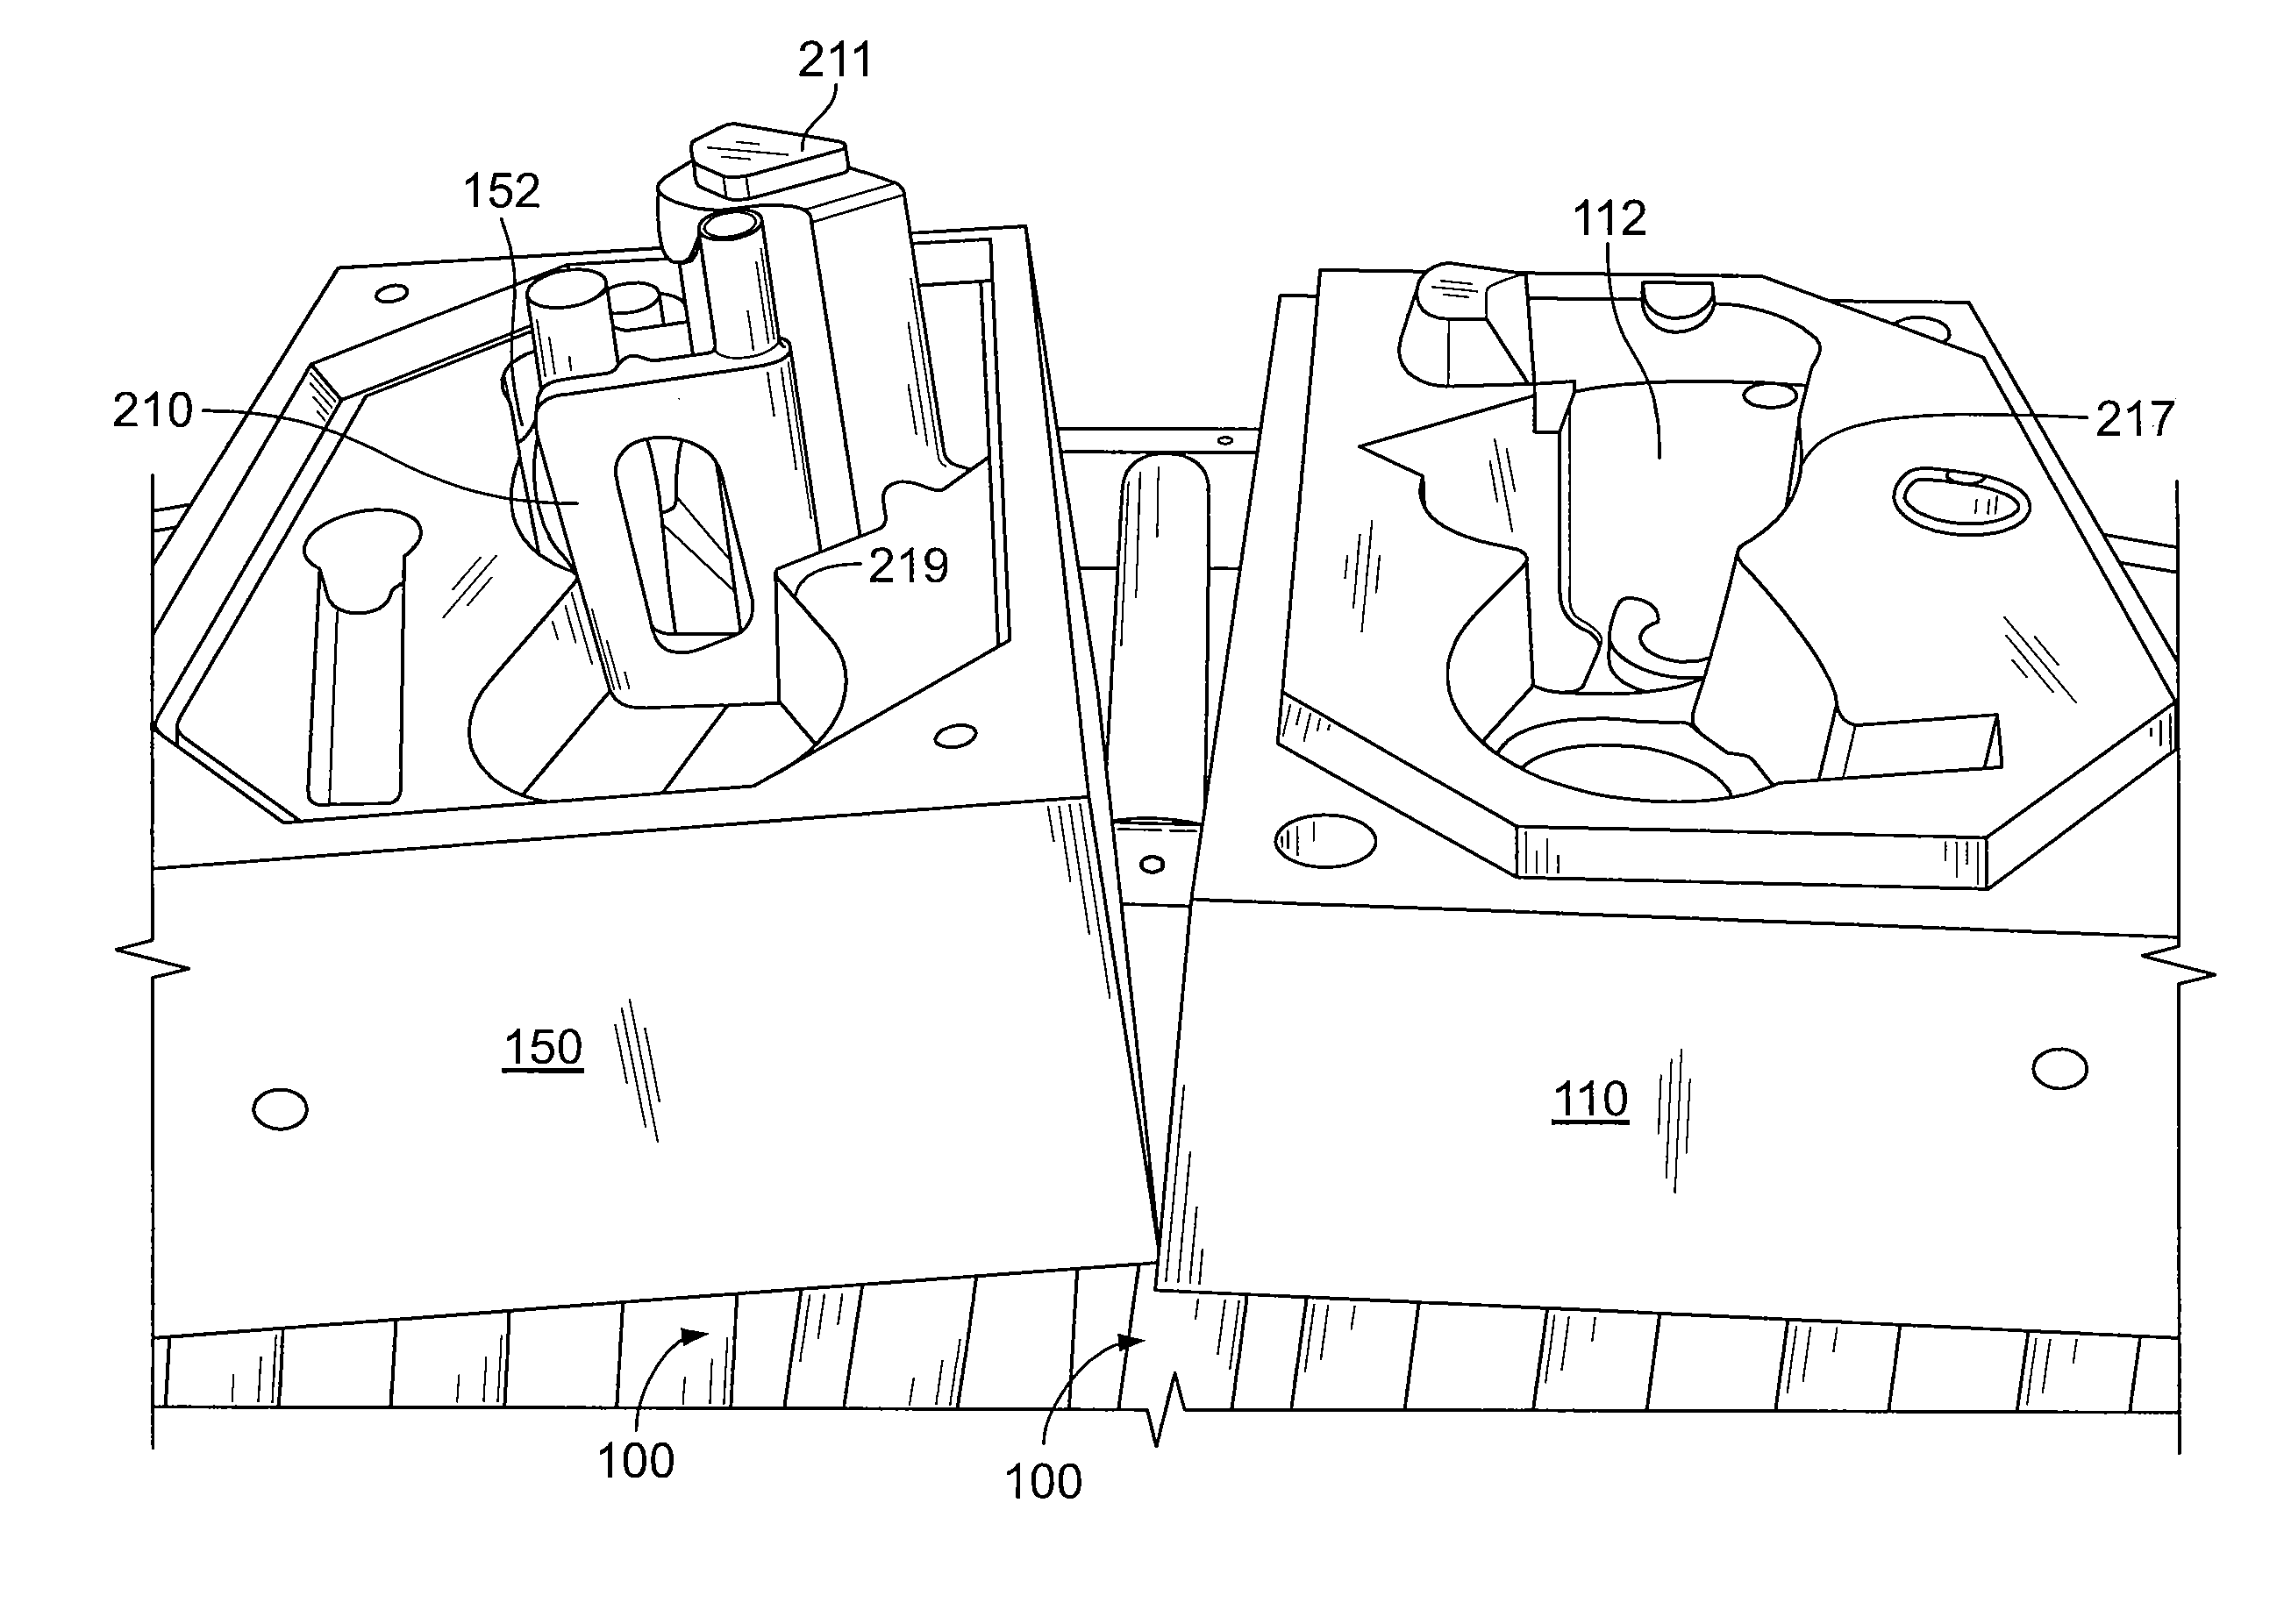 Knuckle formed through the use of improved external and internal sand cores and method of manufacture